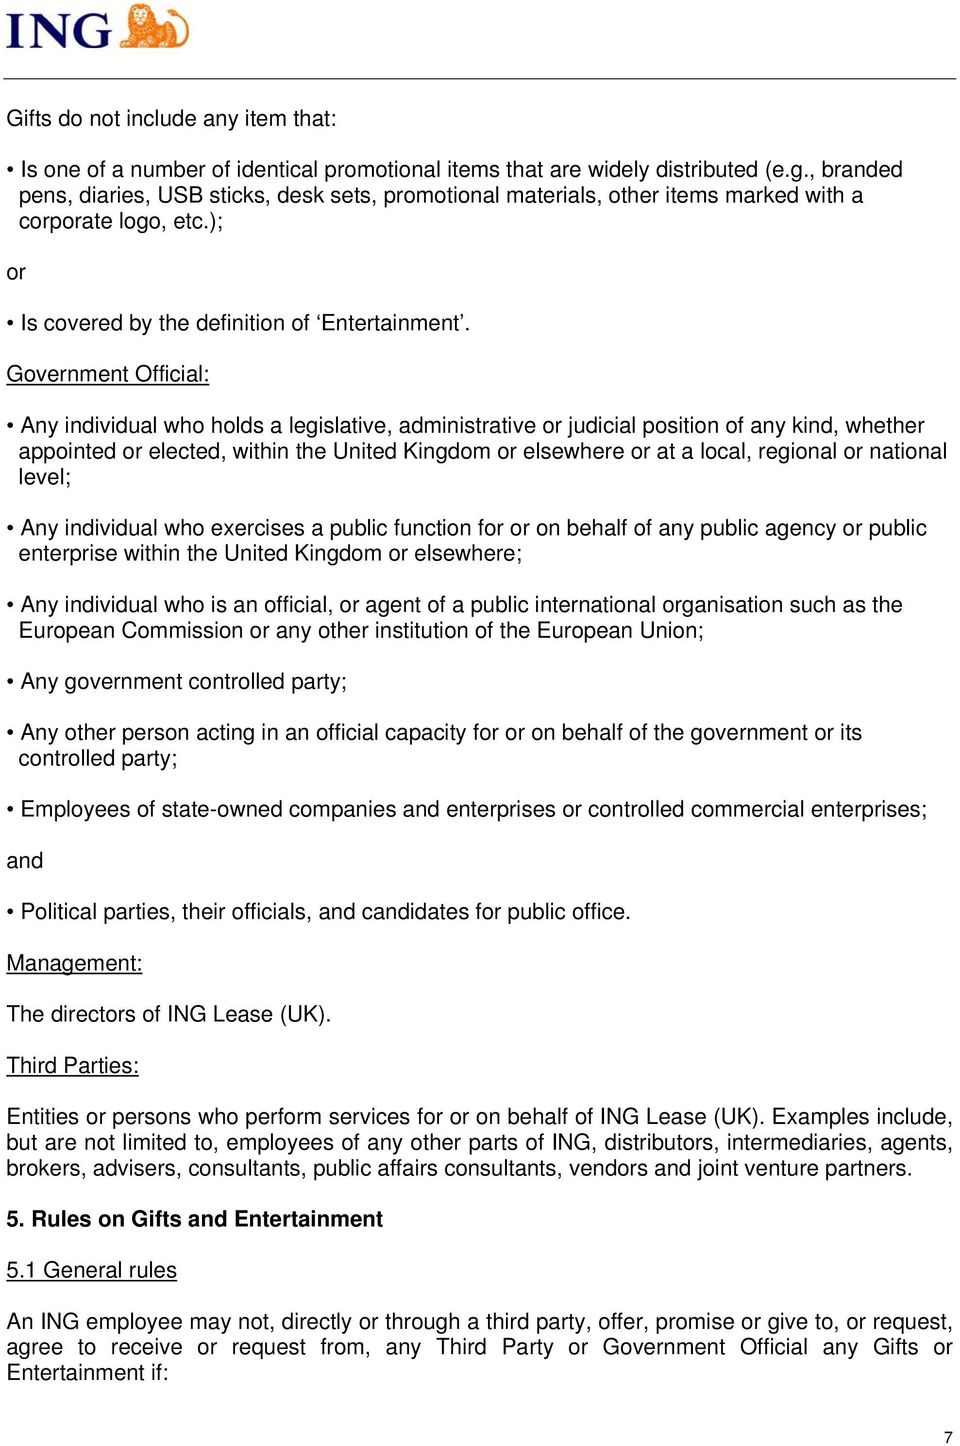 Government Official: Any individual who holds a legislative, administrative or judicial position of any kind, whether appointed or elected, within the United Kingdom or elsewhere or at a local,